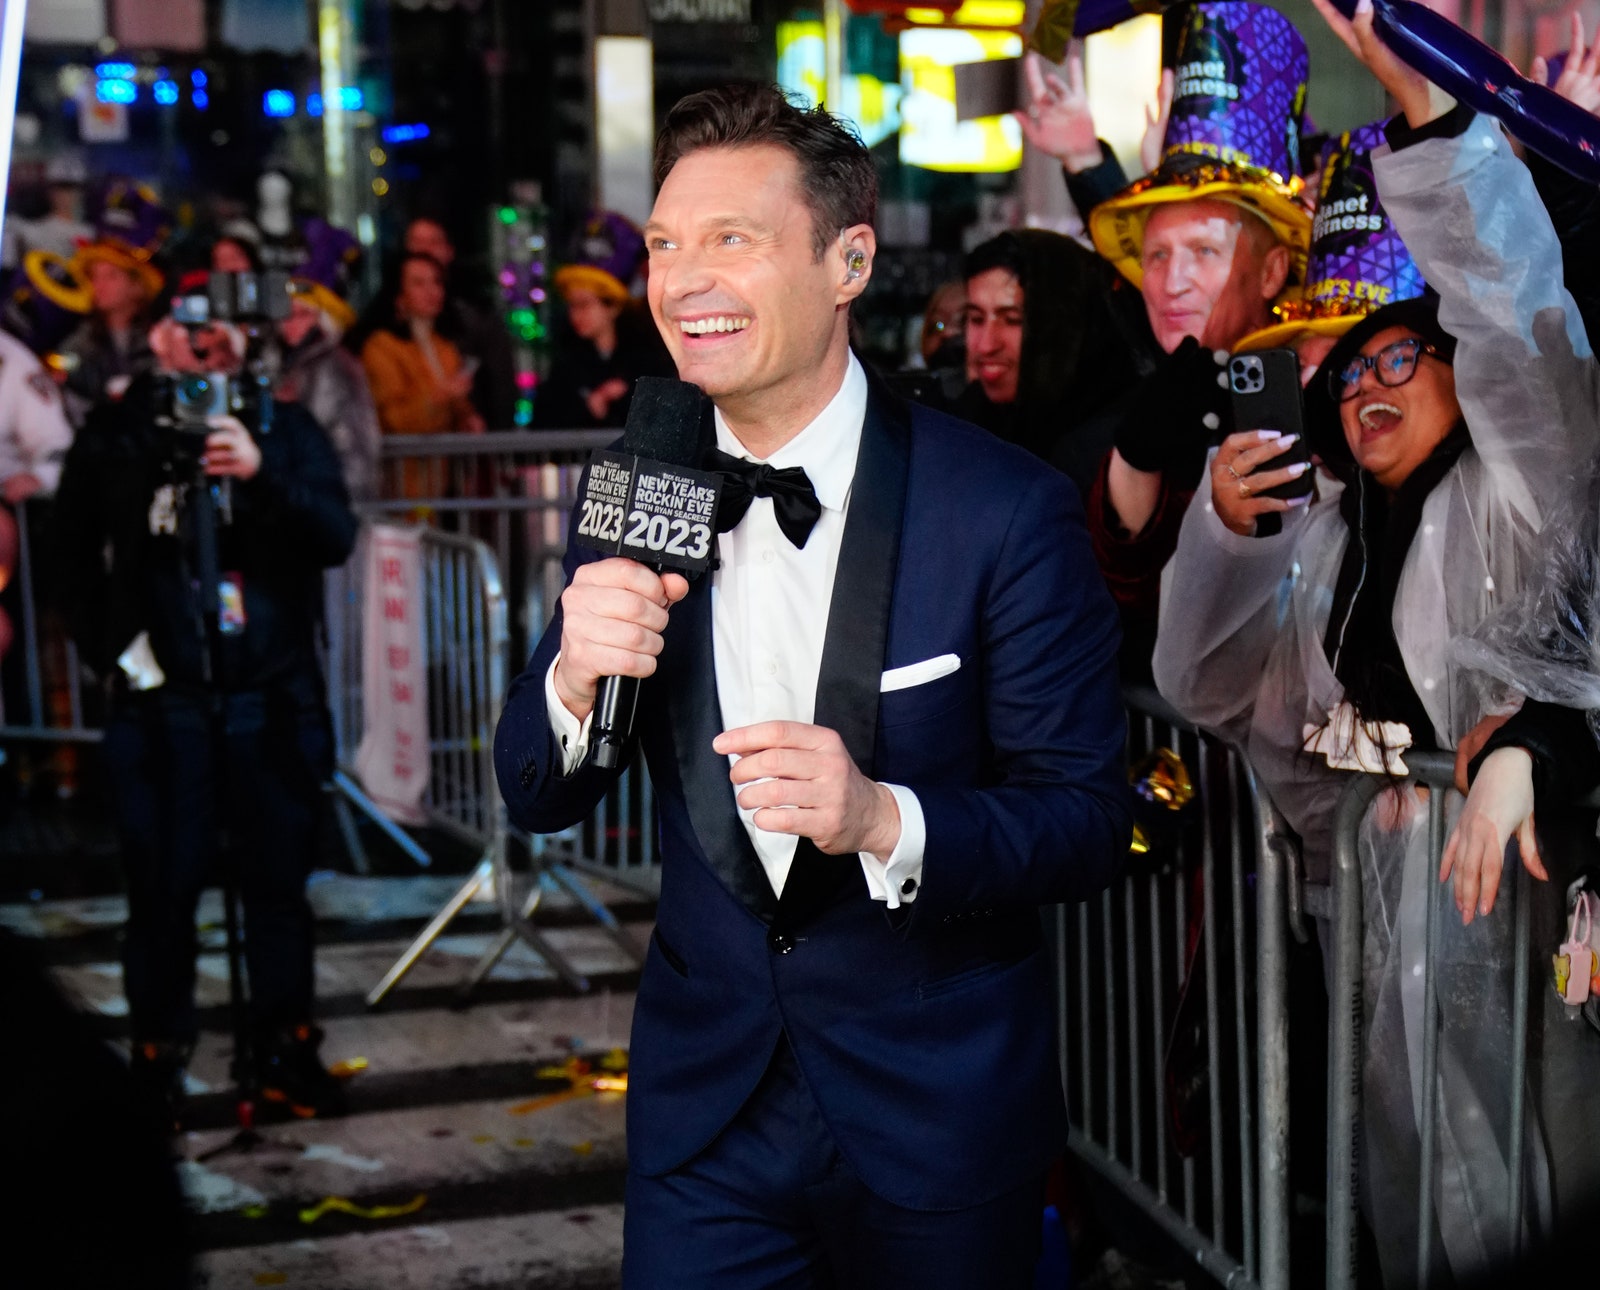 Ryan Seacrest new year's eve times square